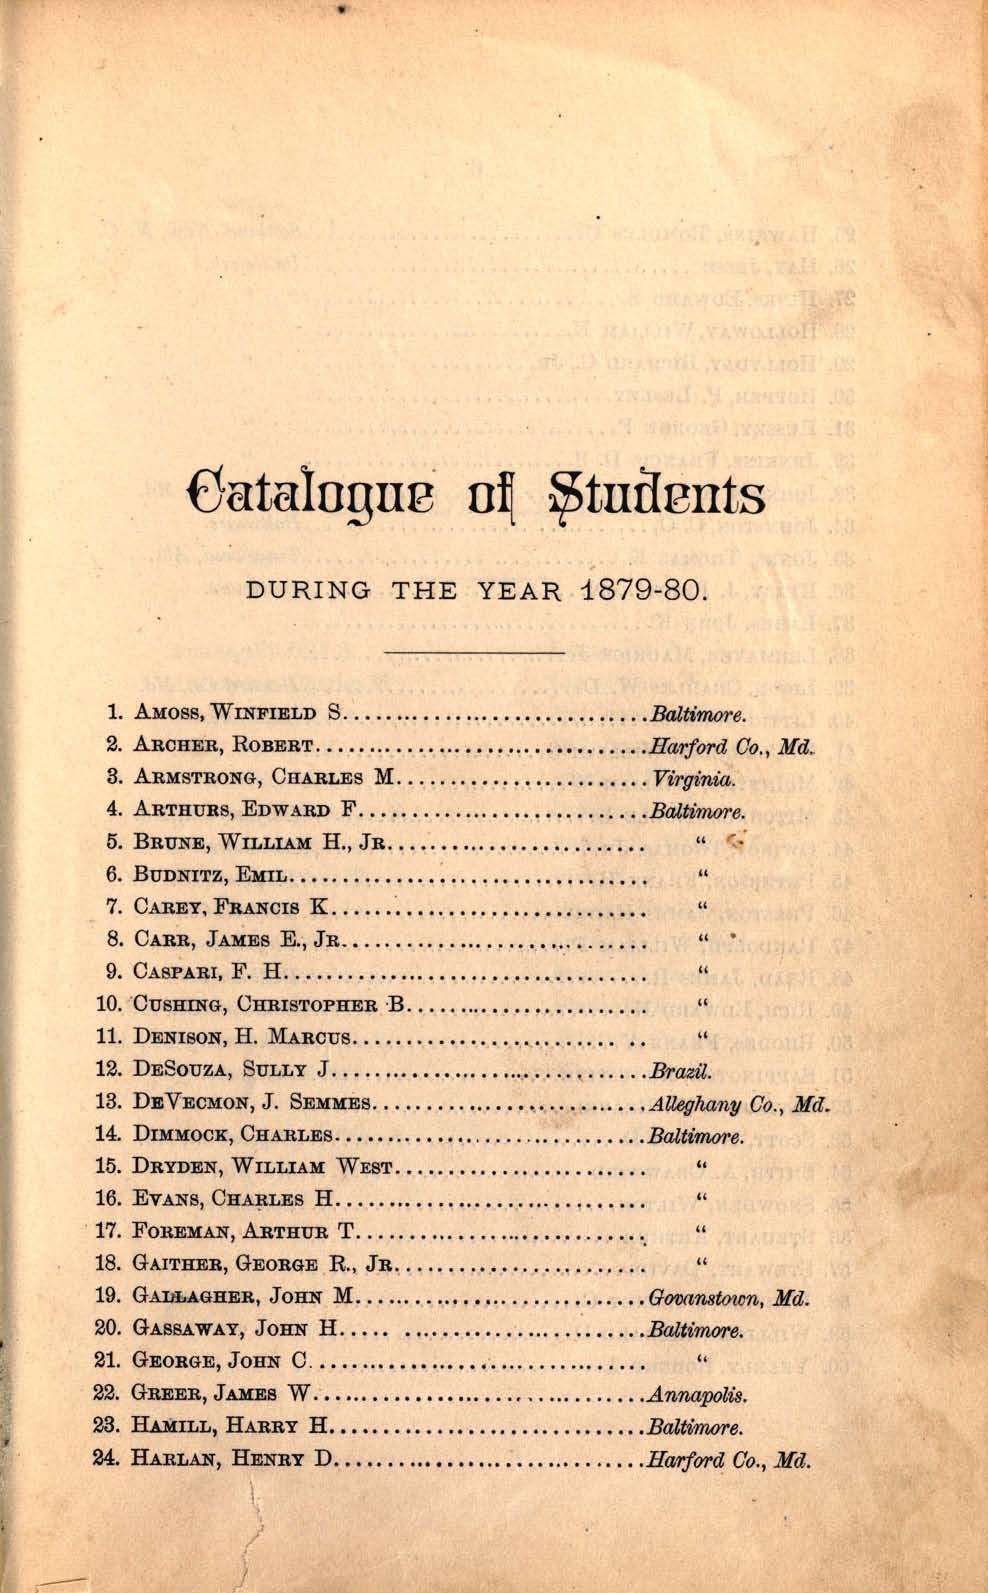 Catalogue of Students DURING THE YEAR 1879-80 1. AMOSS, WINFIELD S Baltimore. 2. ARCHER, ROBERT Harford Co., Md. 3. ARMSTRONG, CHARLES M Virginia. 4. ARTHURS, EDWARD F Baltimore, 5. BRUNE, WILLIAM H.